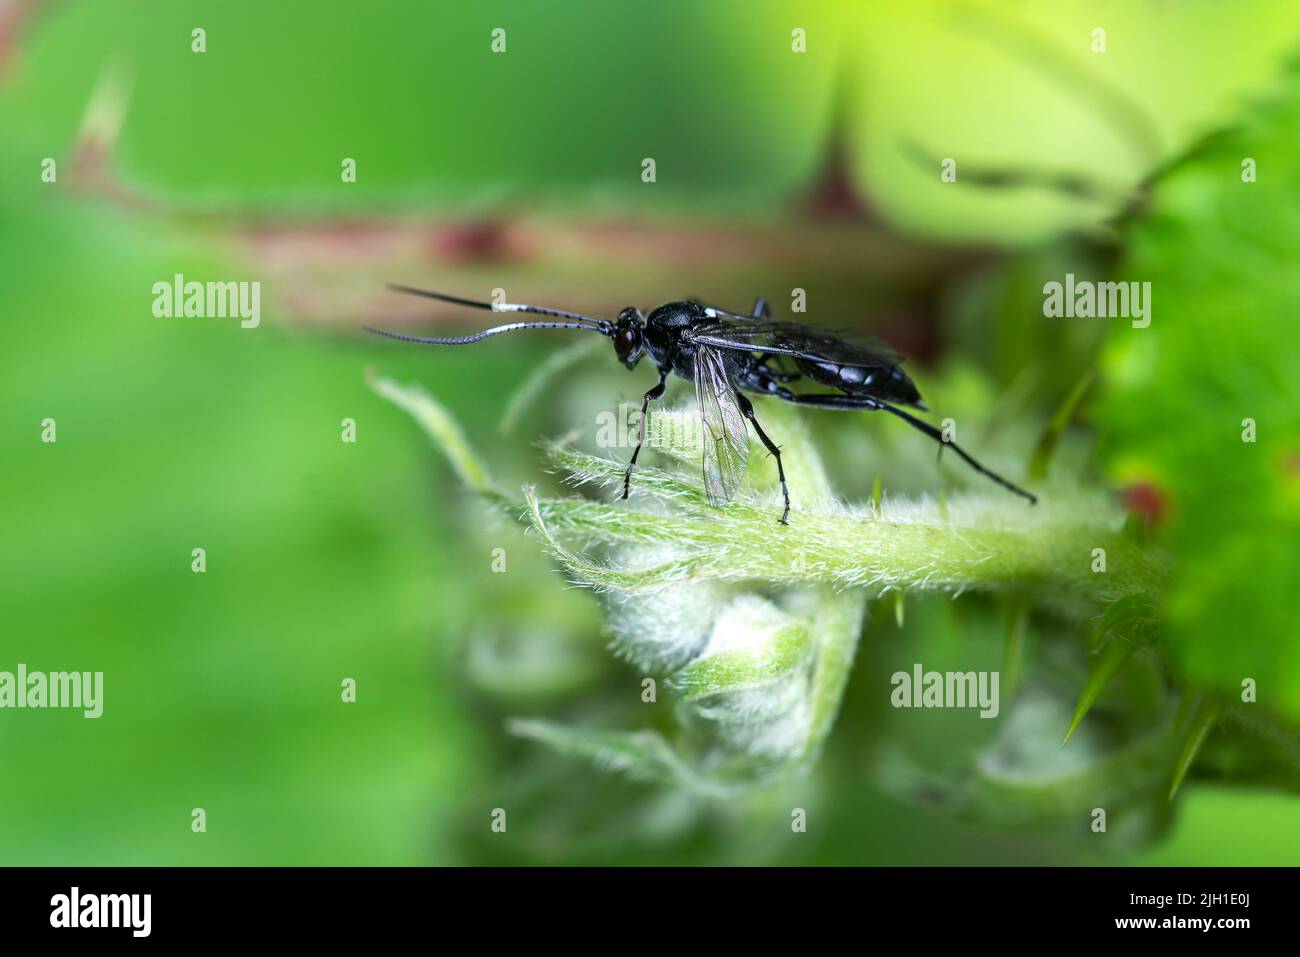 Ichneumonid wasp (Ichneumon Coelichneumon) a parasitic black flying insect, stock photo image Stock Photo